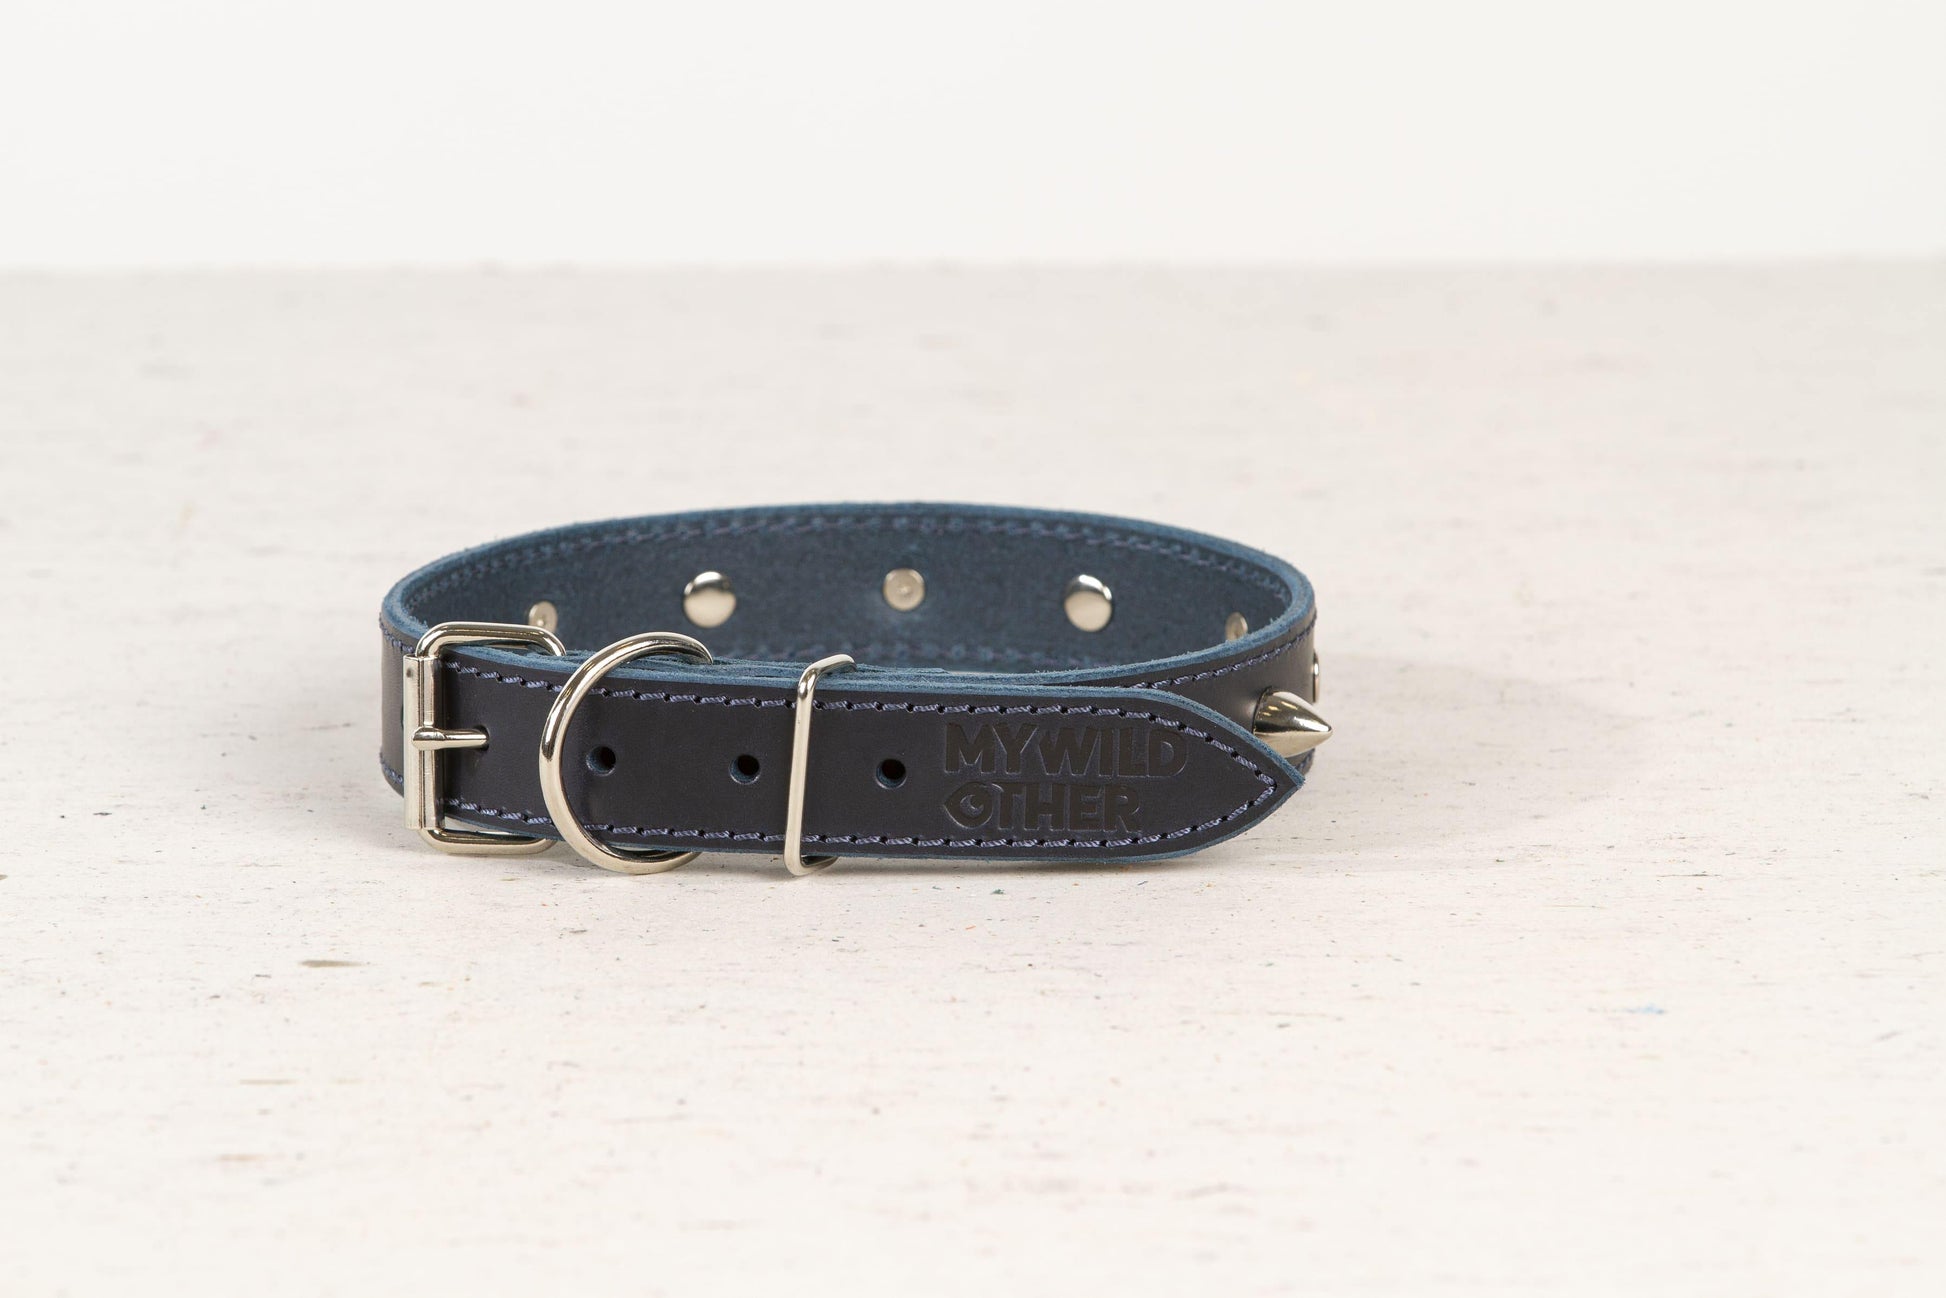 Handmade blue leather STUDDED dog collar - European handmade dog accessories by My Wild Other